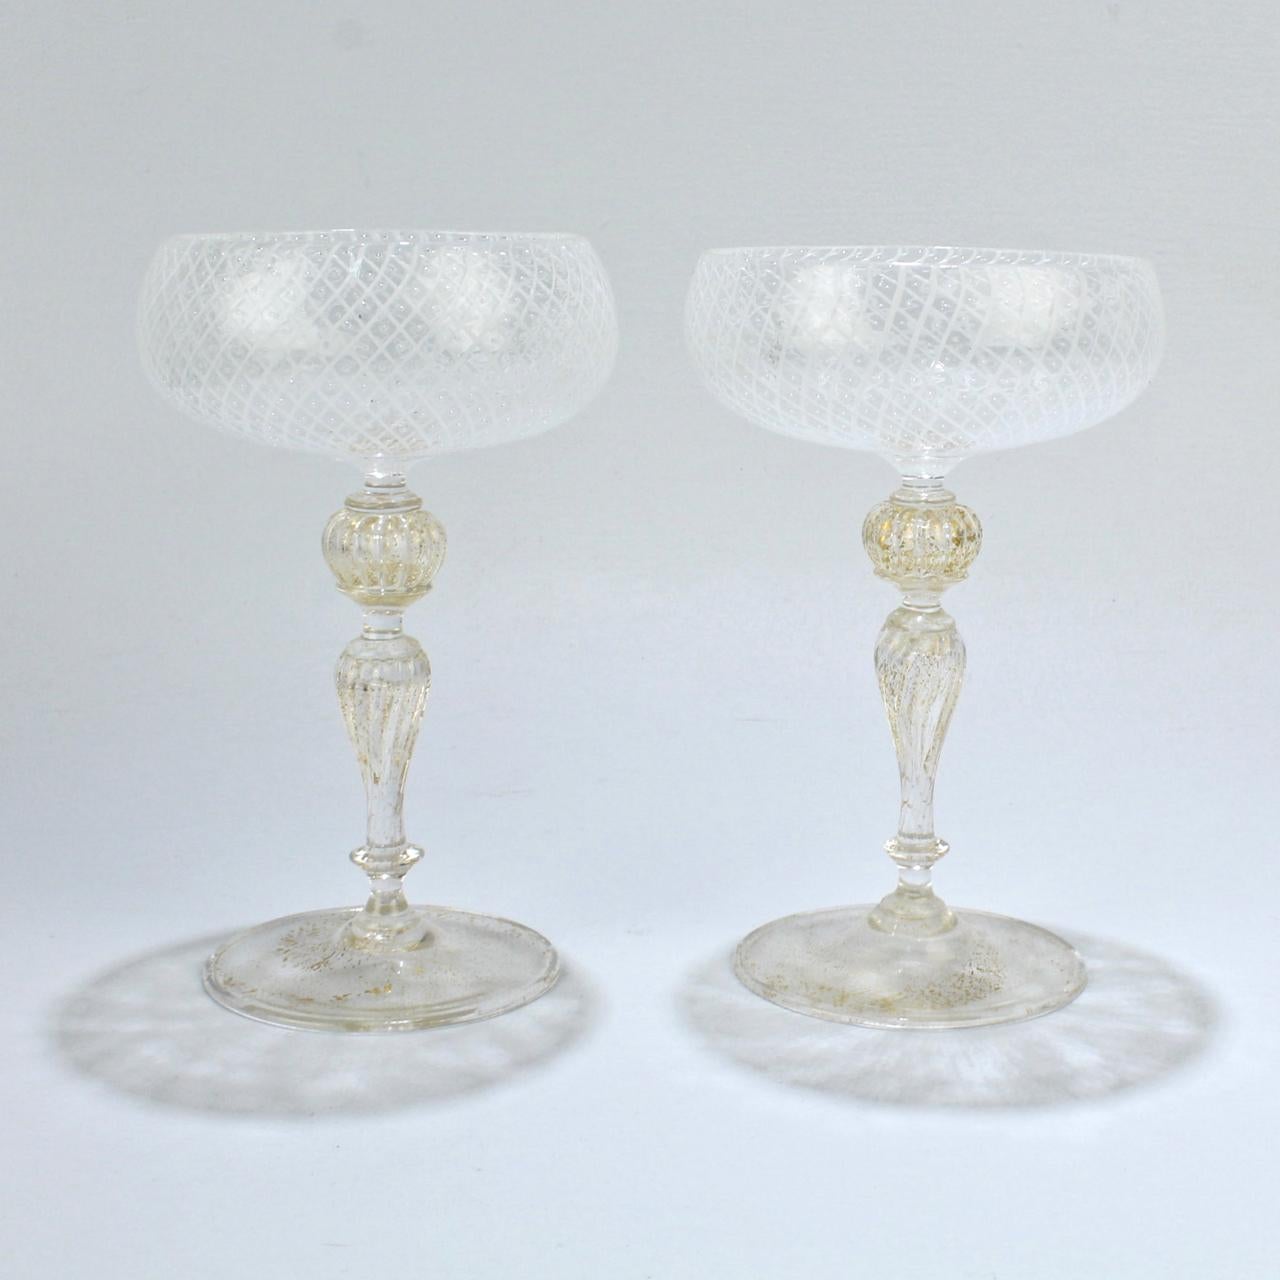 An elegant set of 10 Venetian glass champagne coupes.

Attributed to Seguso.

The bowl of each coupe is finely decorated in the reticulo filigrana technique (which consists of individual white glass rods in a diamond mesh pattern that is